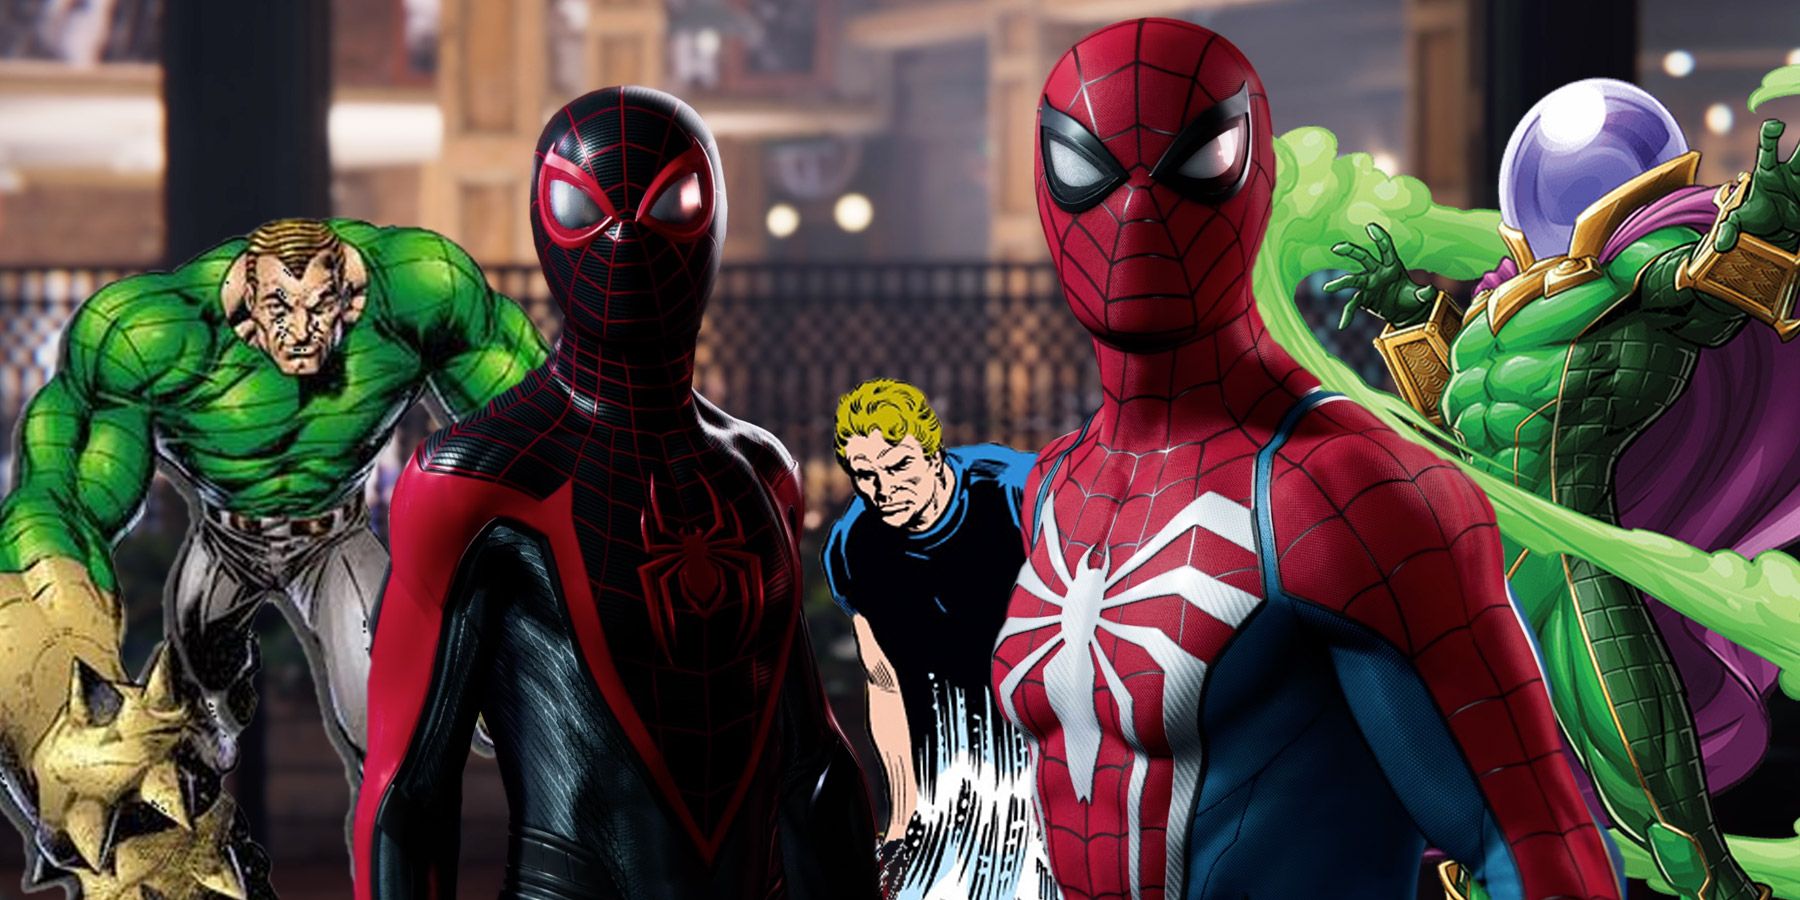 Villains That Would Make Interesting Boss Fights in Marvel's Spider-Man 2